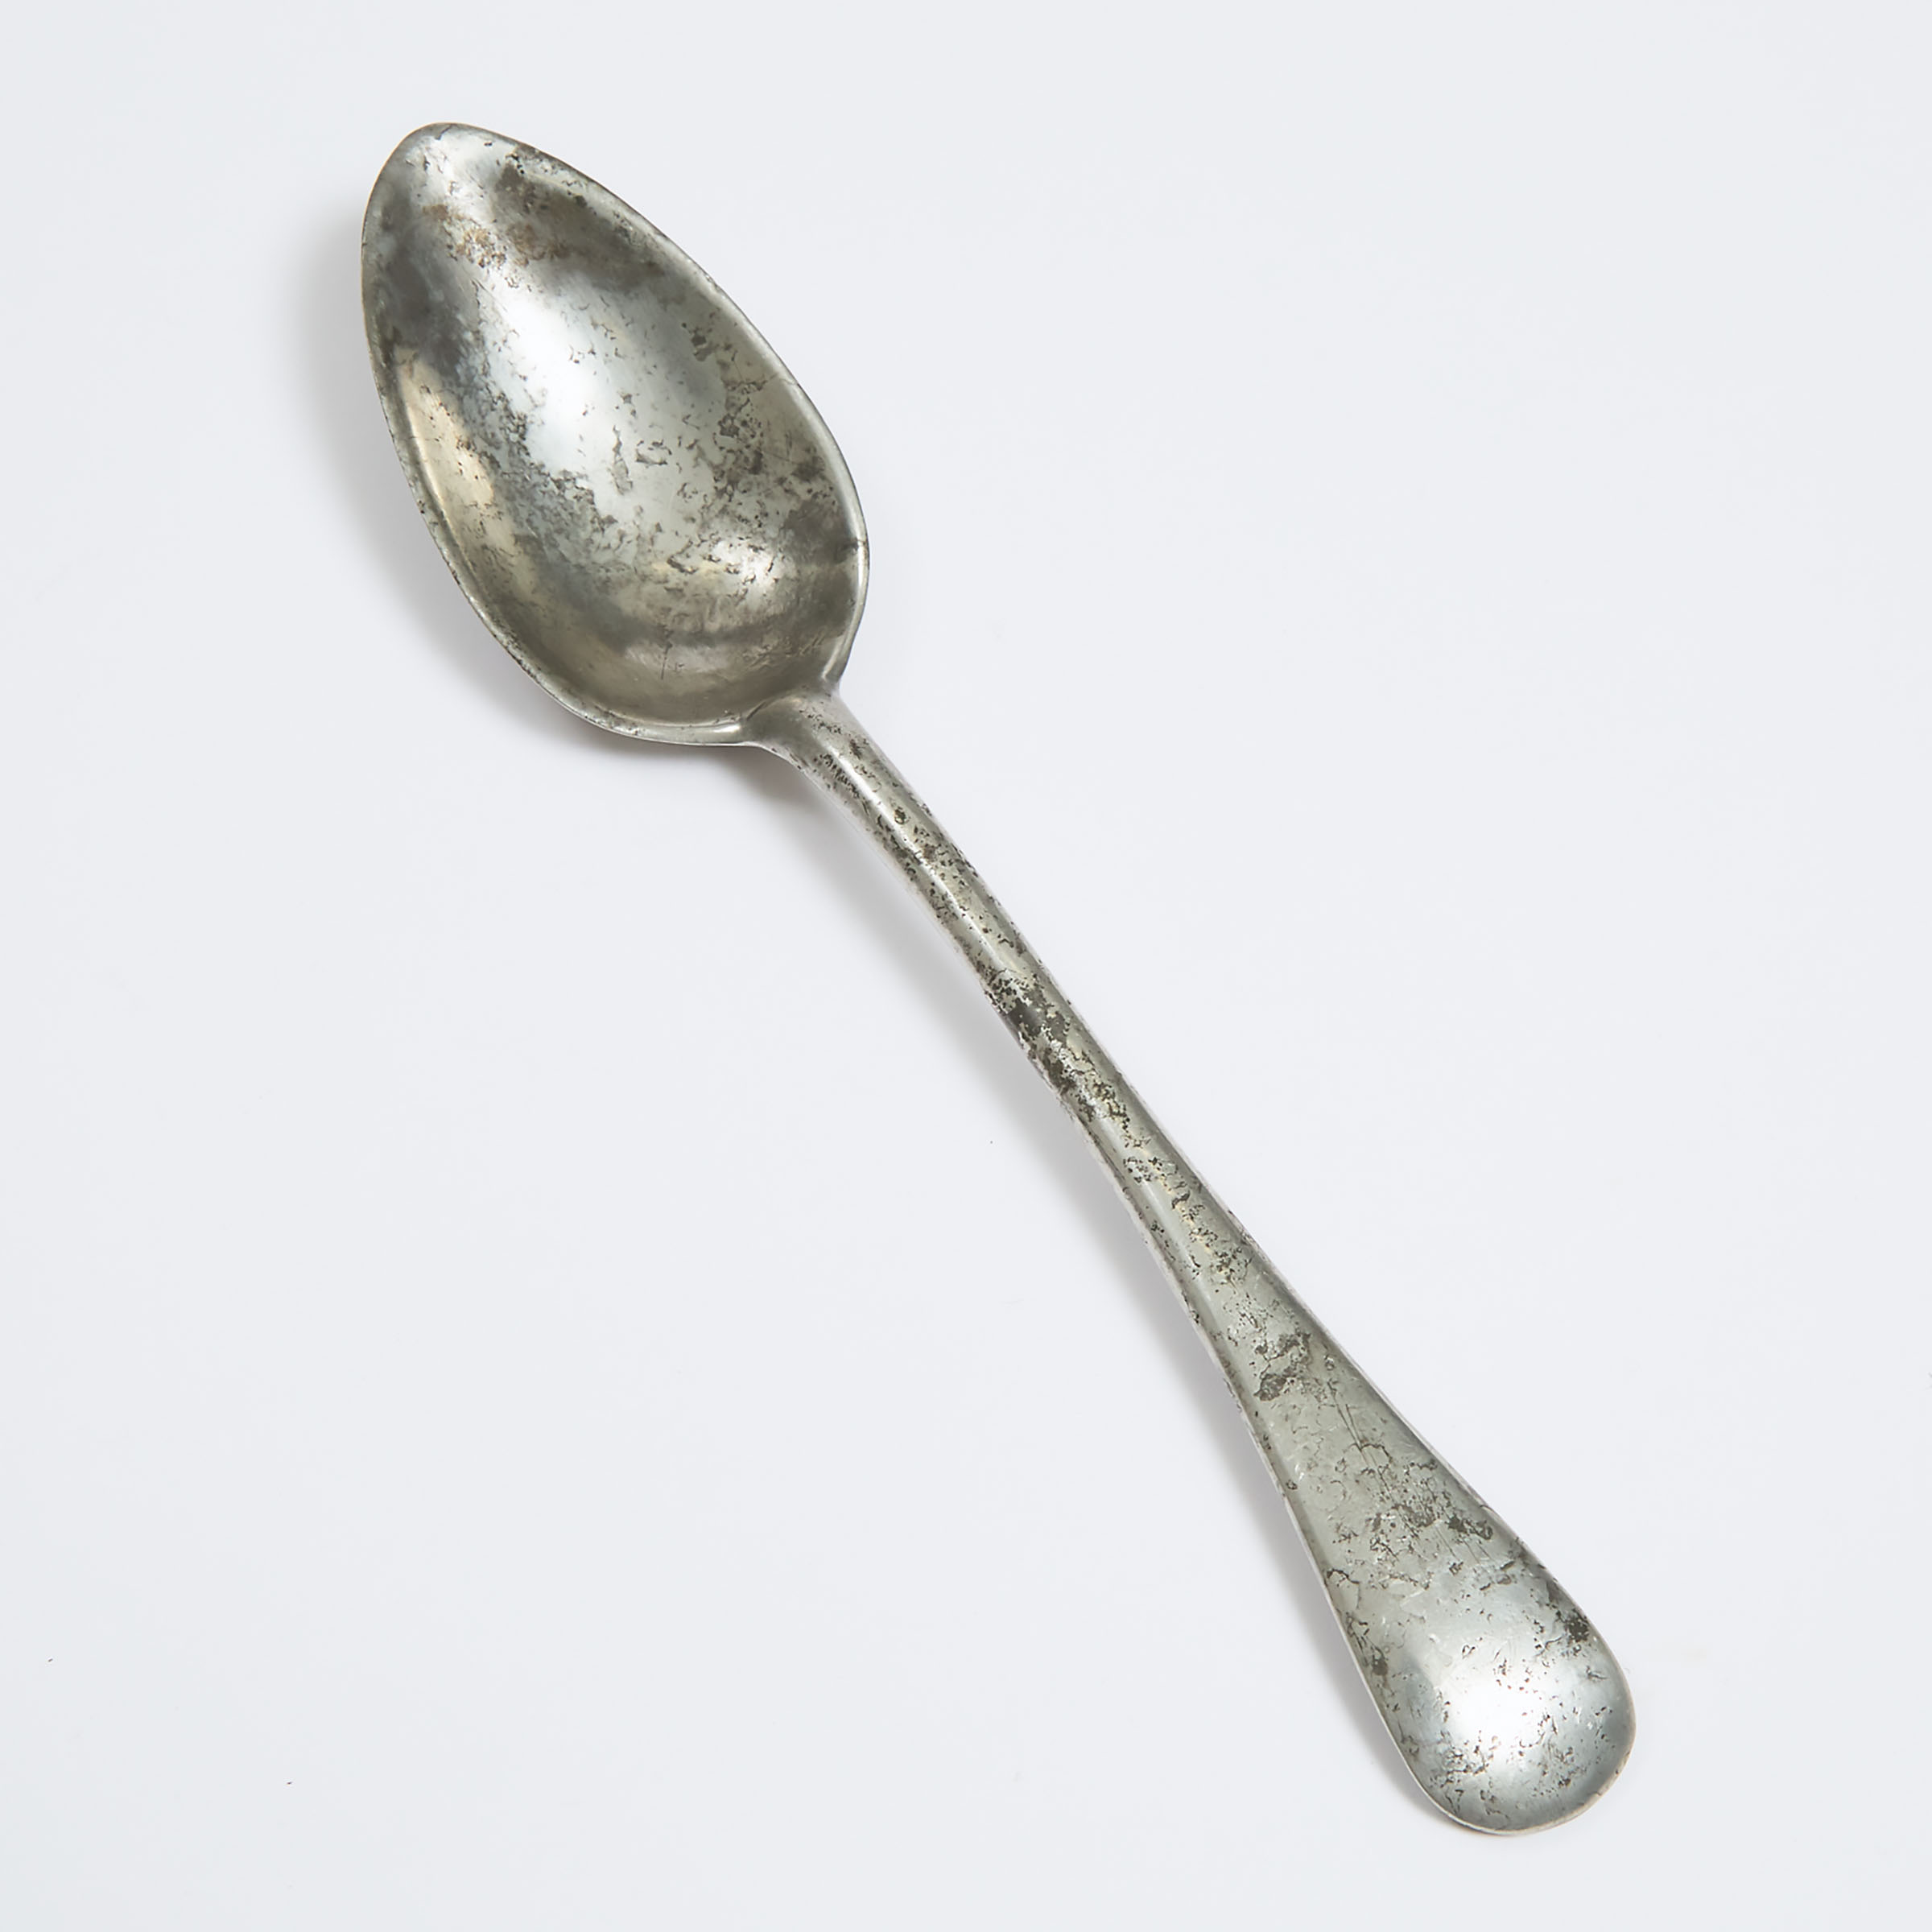 English Pewter Table Spoon, Peter Durie, Aberdeen, 1823-1838